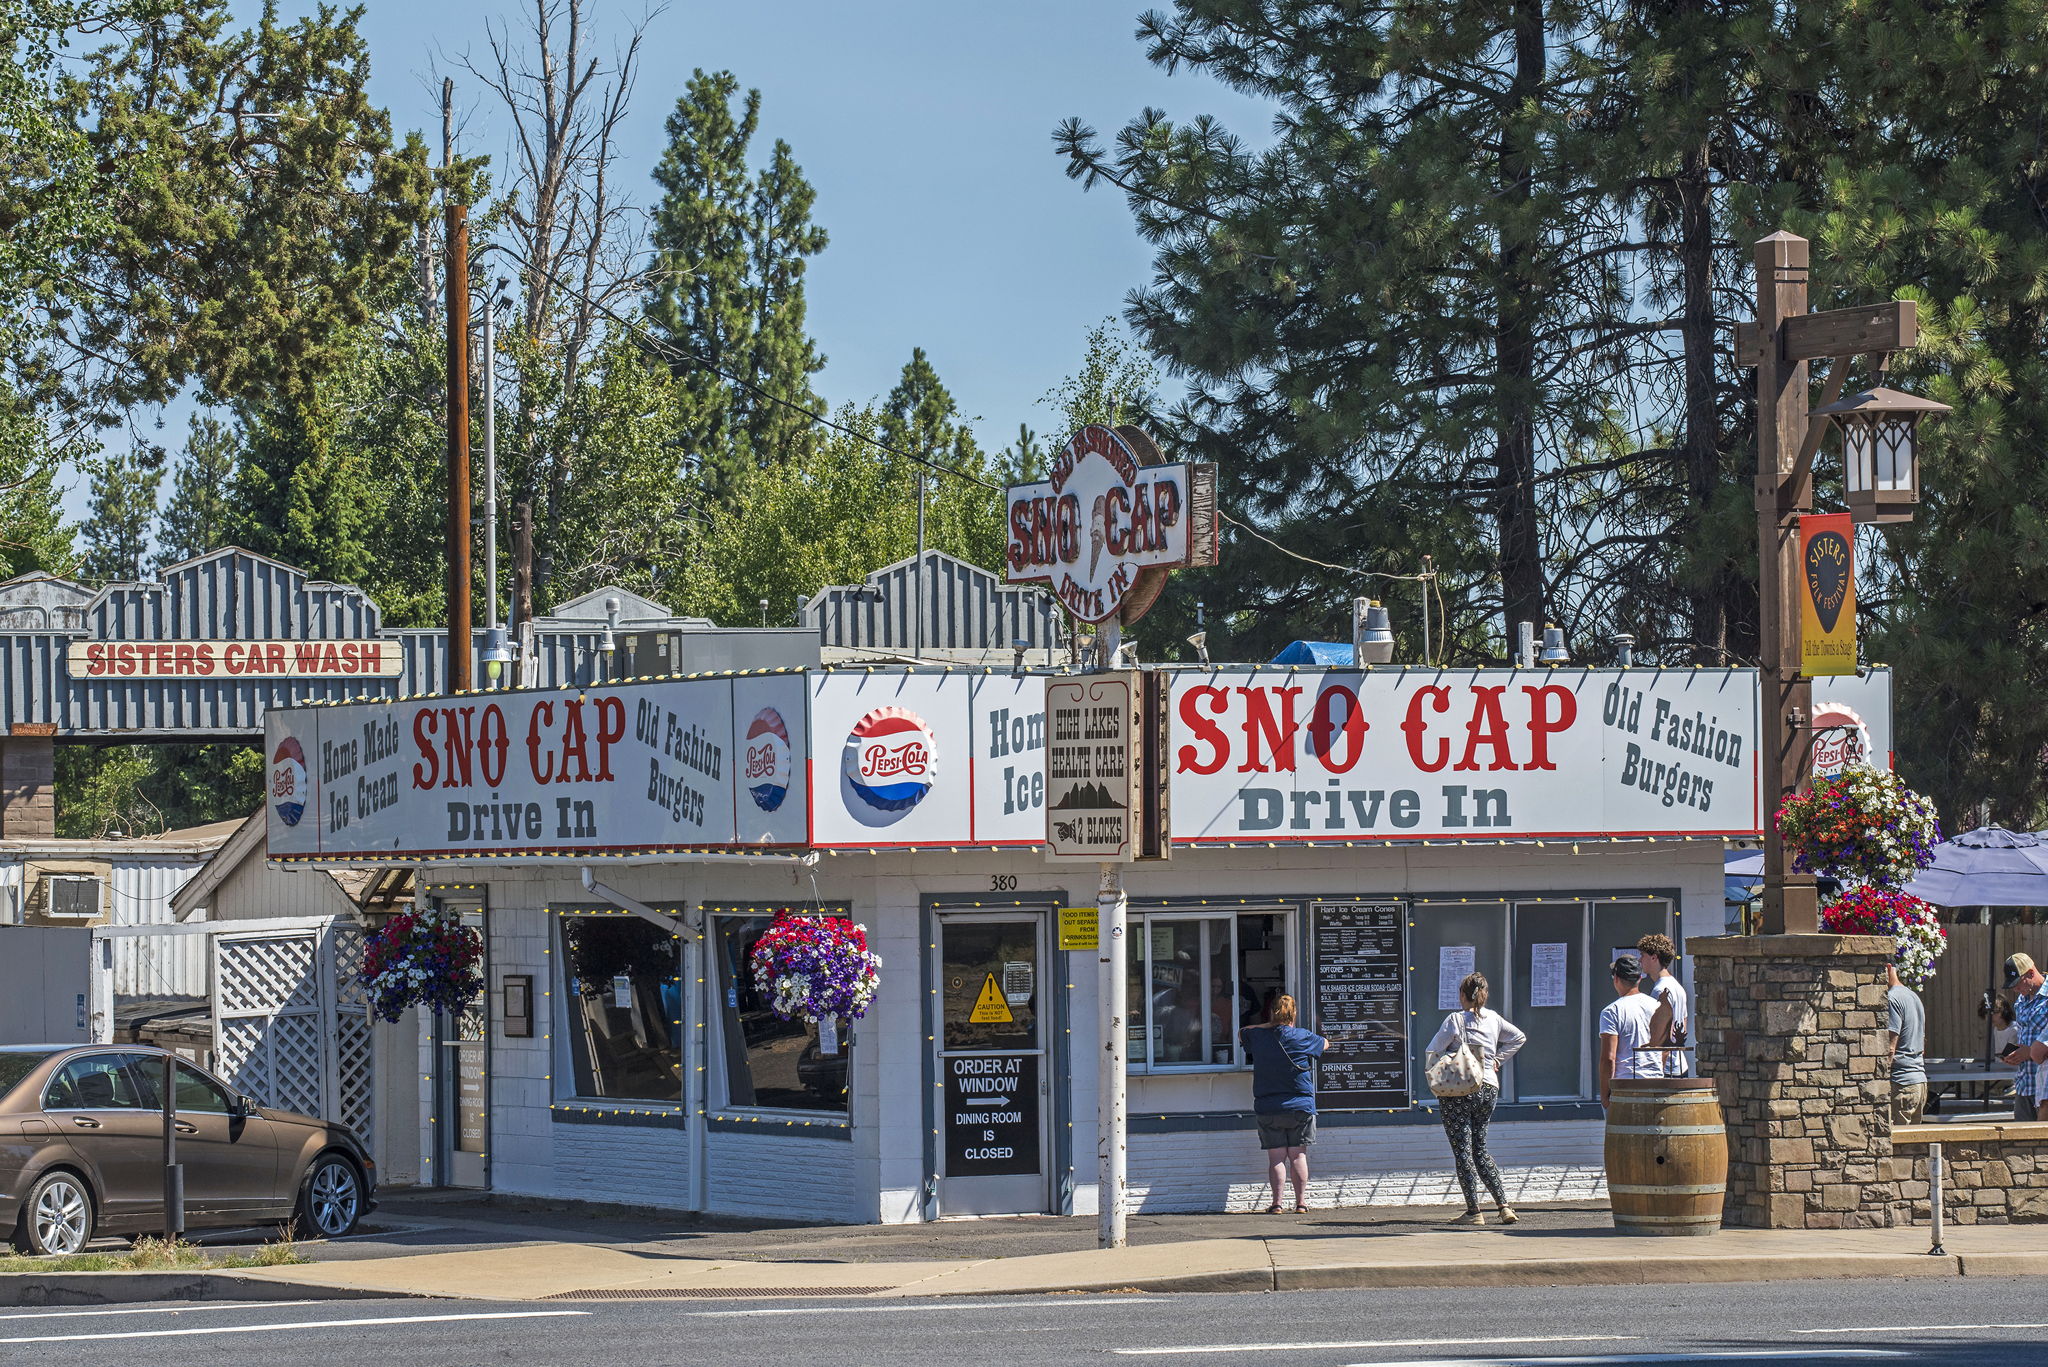 Sisters Sno-Cap, 380 W Cascade. Lots are adjacent to the renowned Stitchin' Post quilt store, High Desert Chocolates, iconic Sno-Cap drive-in, Sisters Arts District, 1 block from Sisters Coffee, and more.